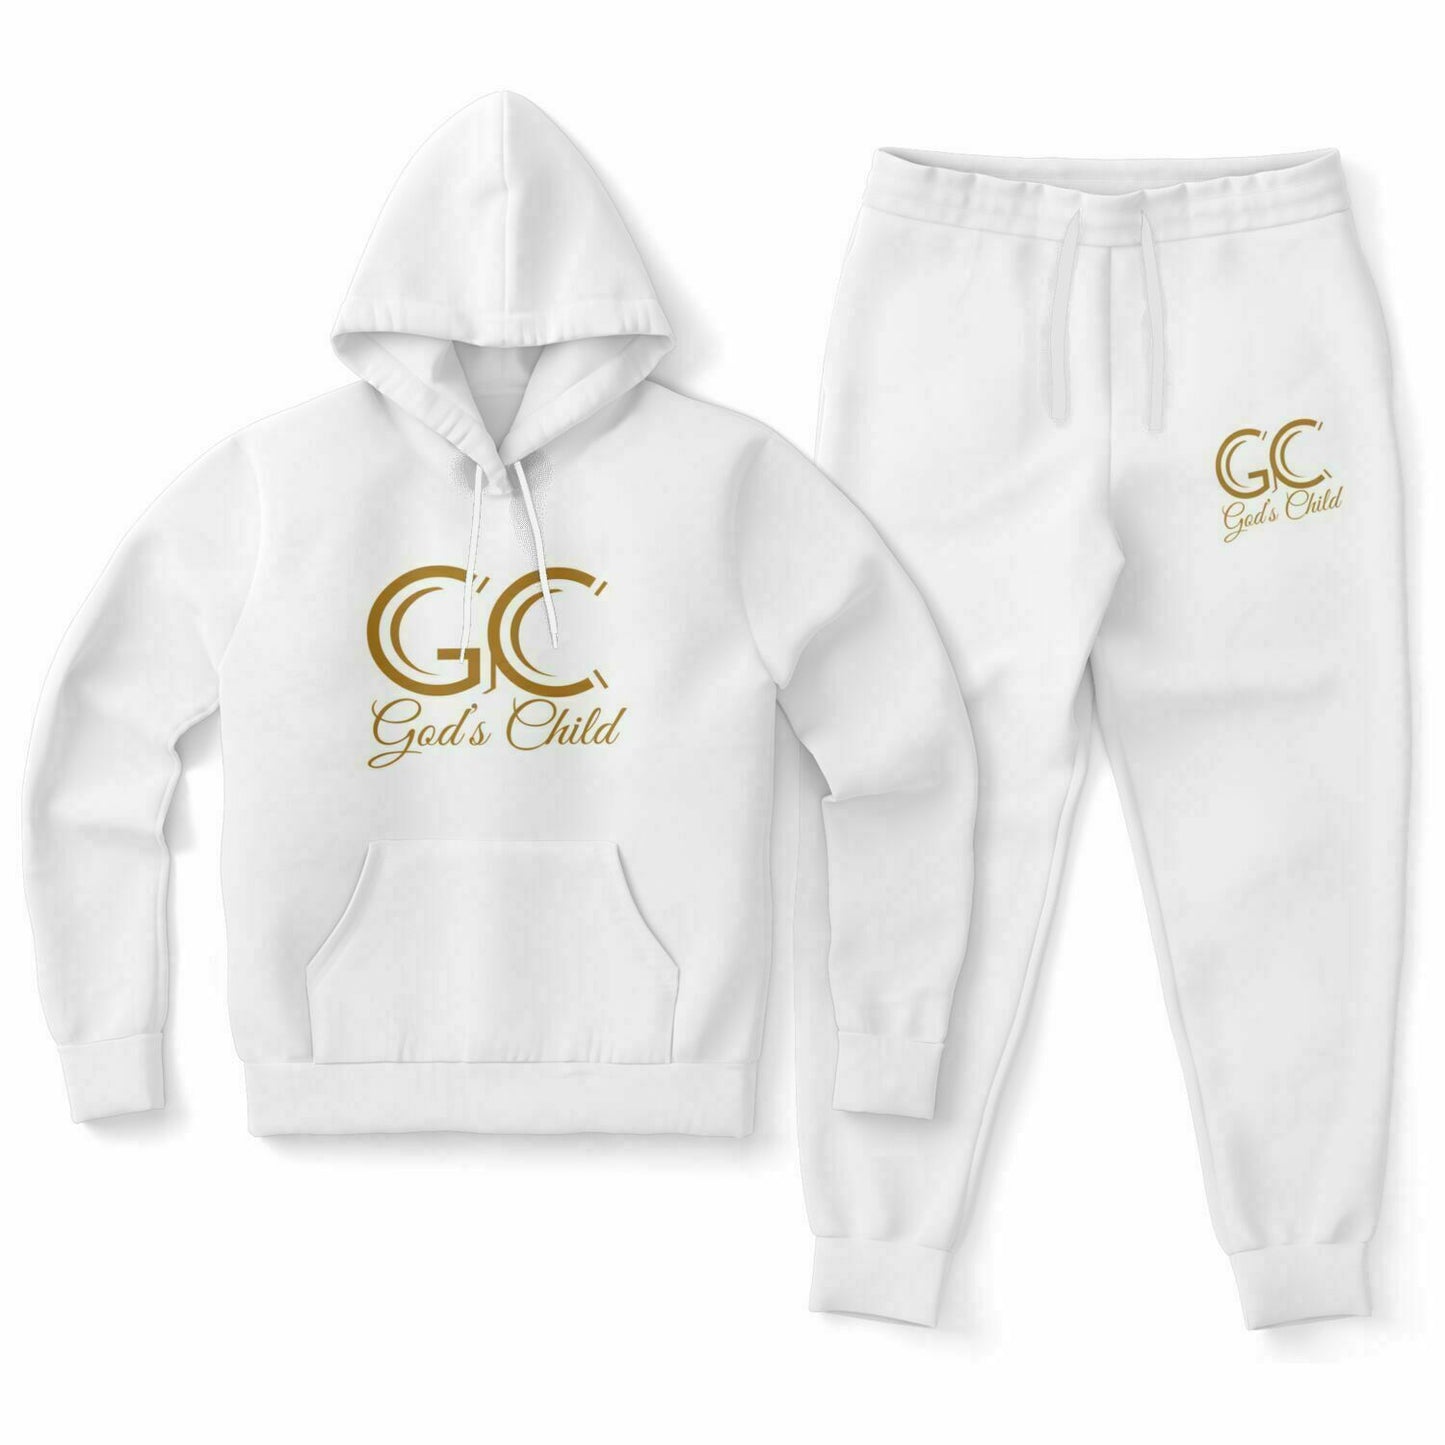 God's Child All White Sweat Suit